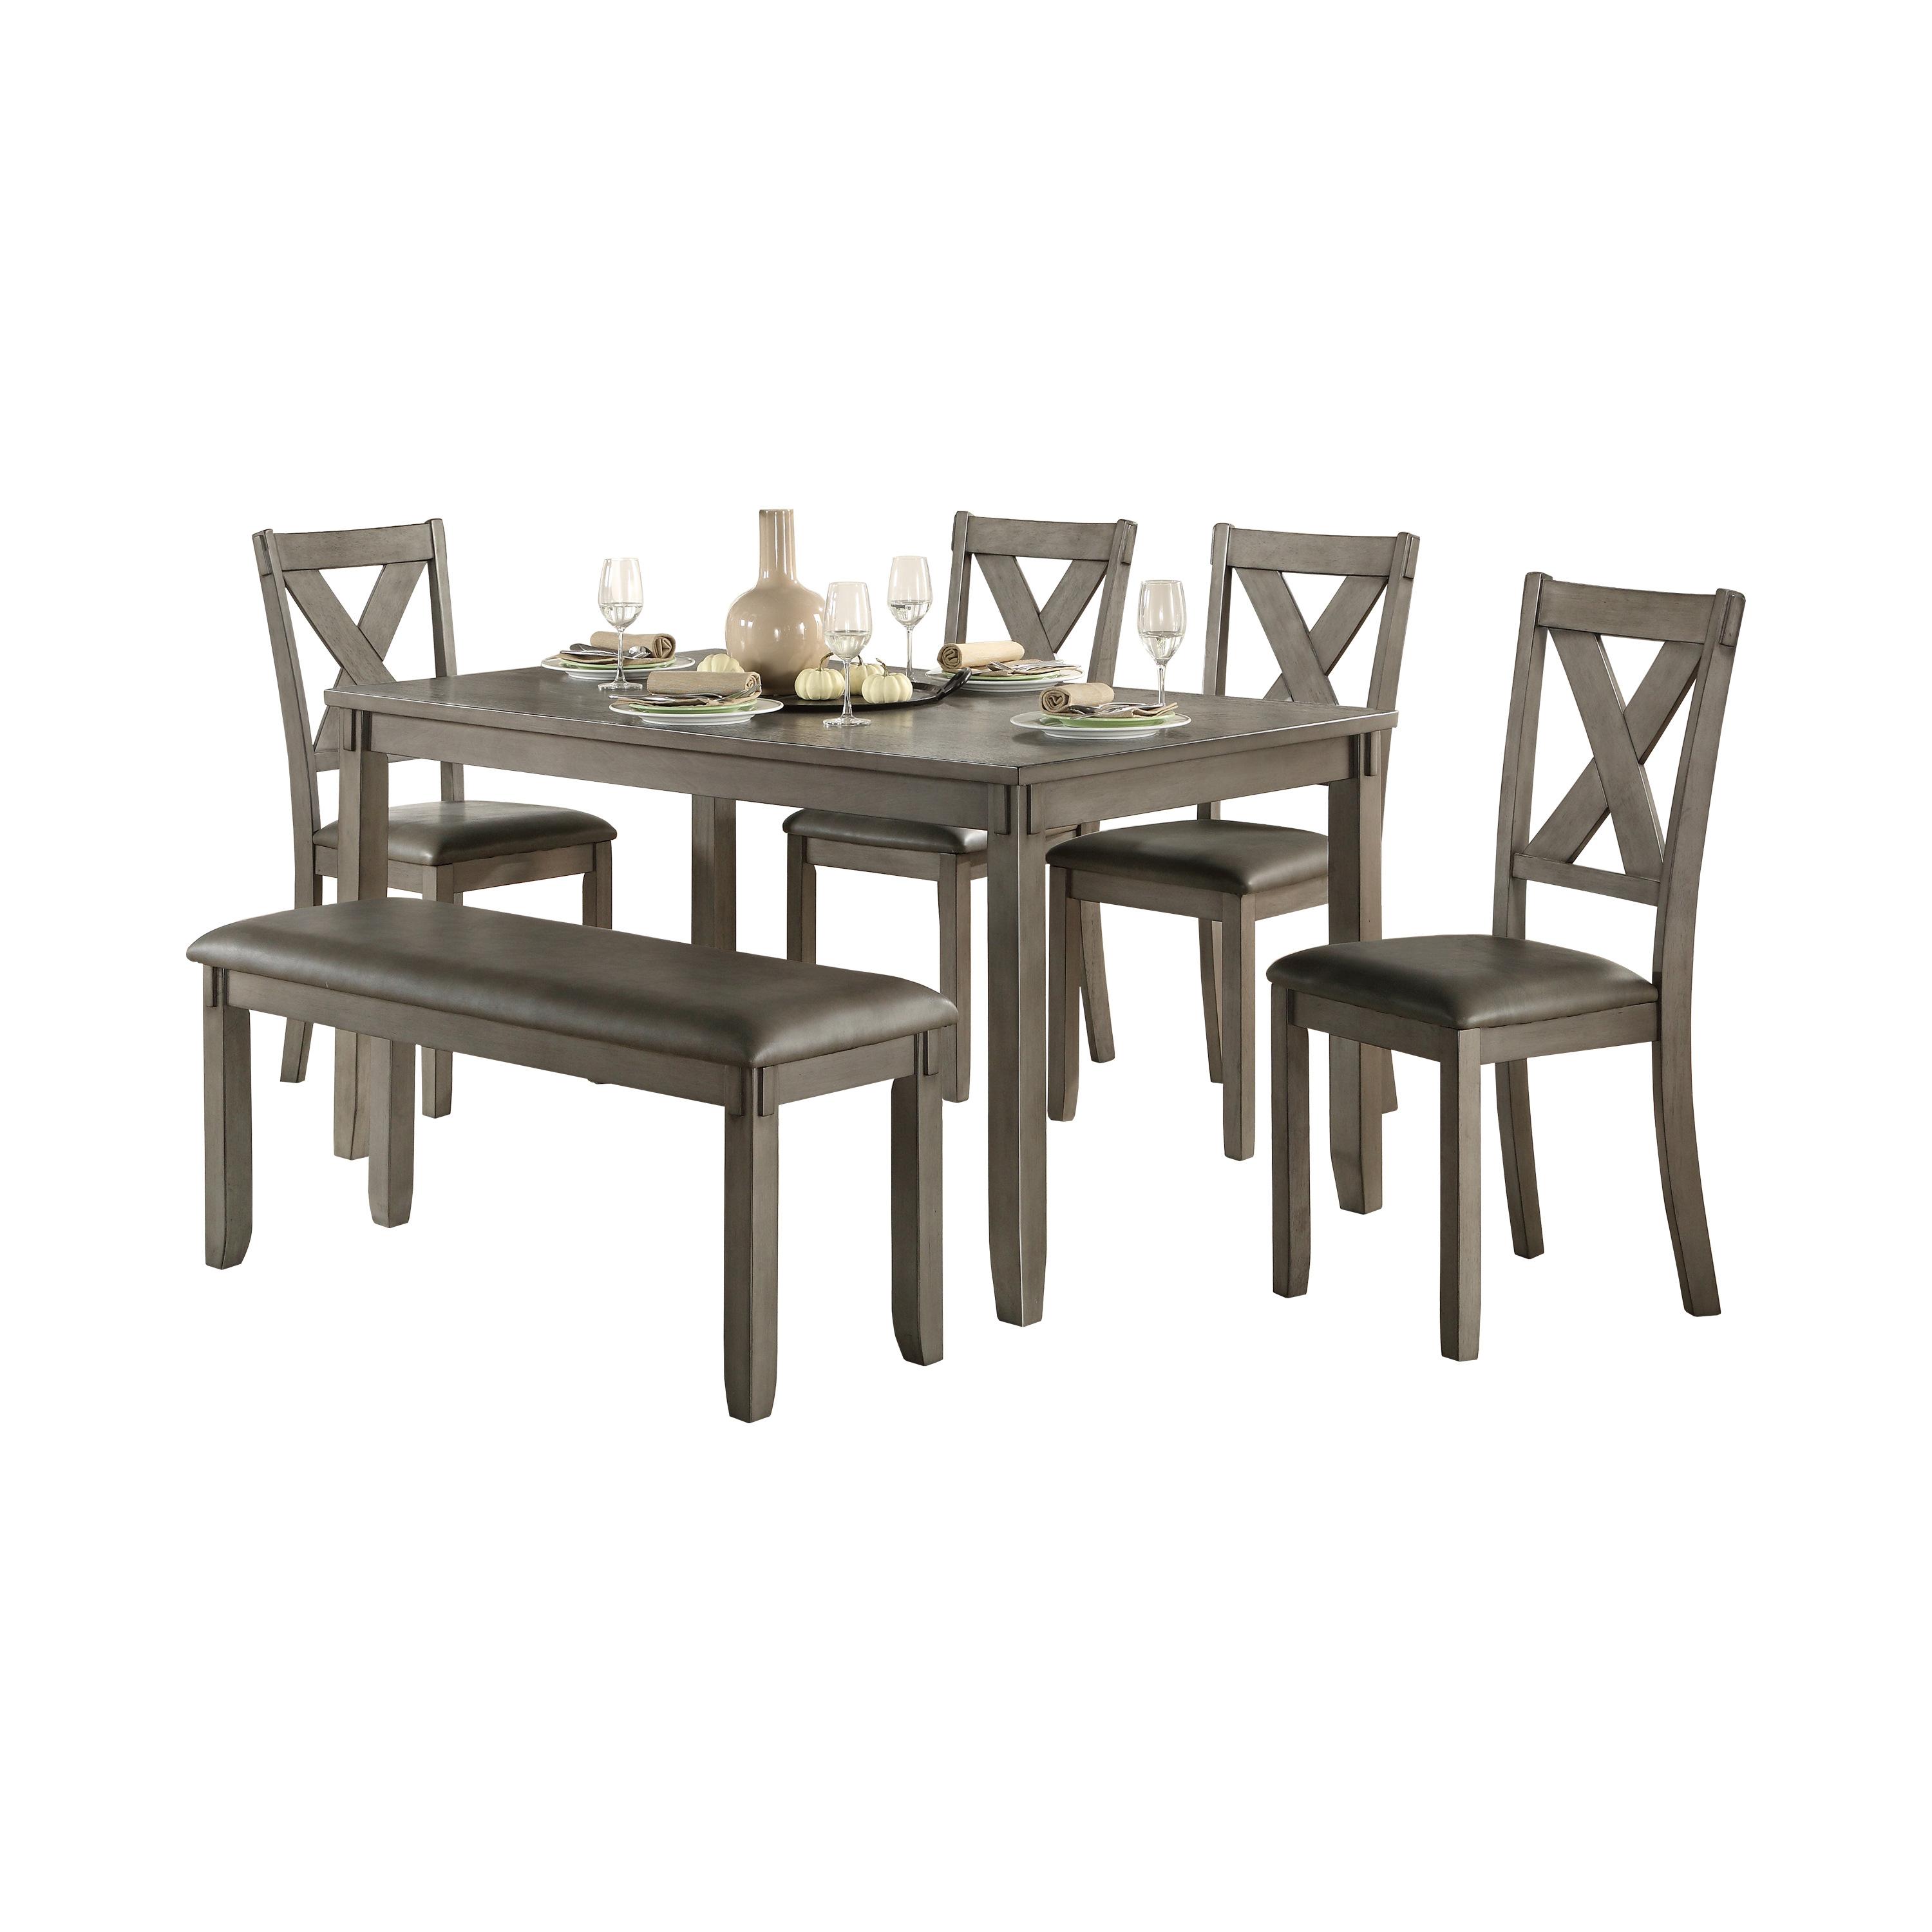 Transitional Dining Room Set 5693 Holders 5693 in Gray Faux Leather